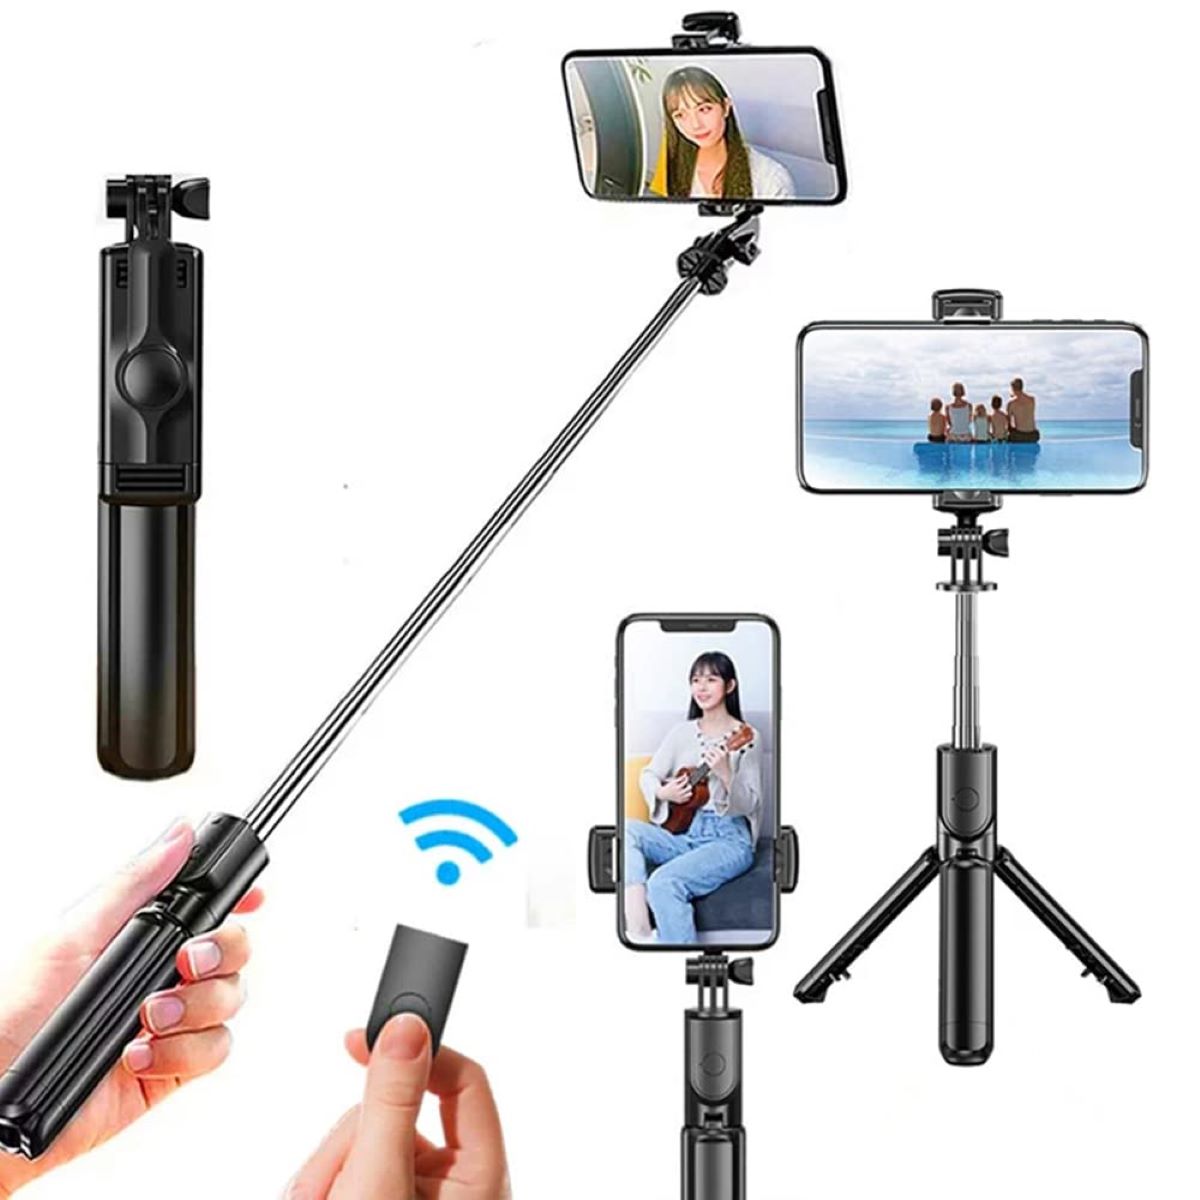 monopod-selfie-handheld-stick-with-holder-and-bluetooth-remote-for-cameras-what-phones